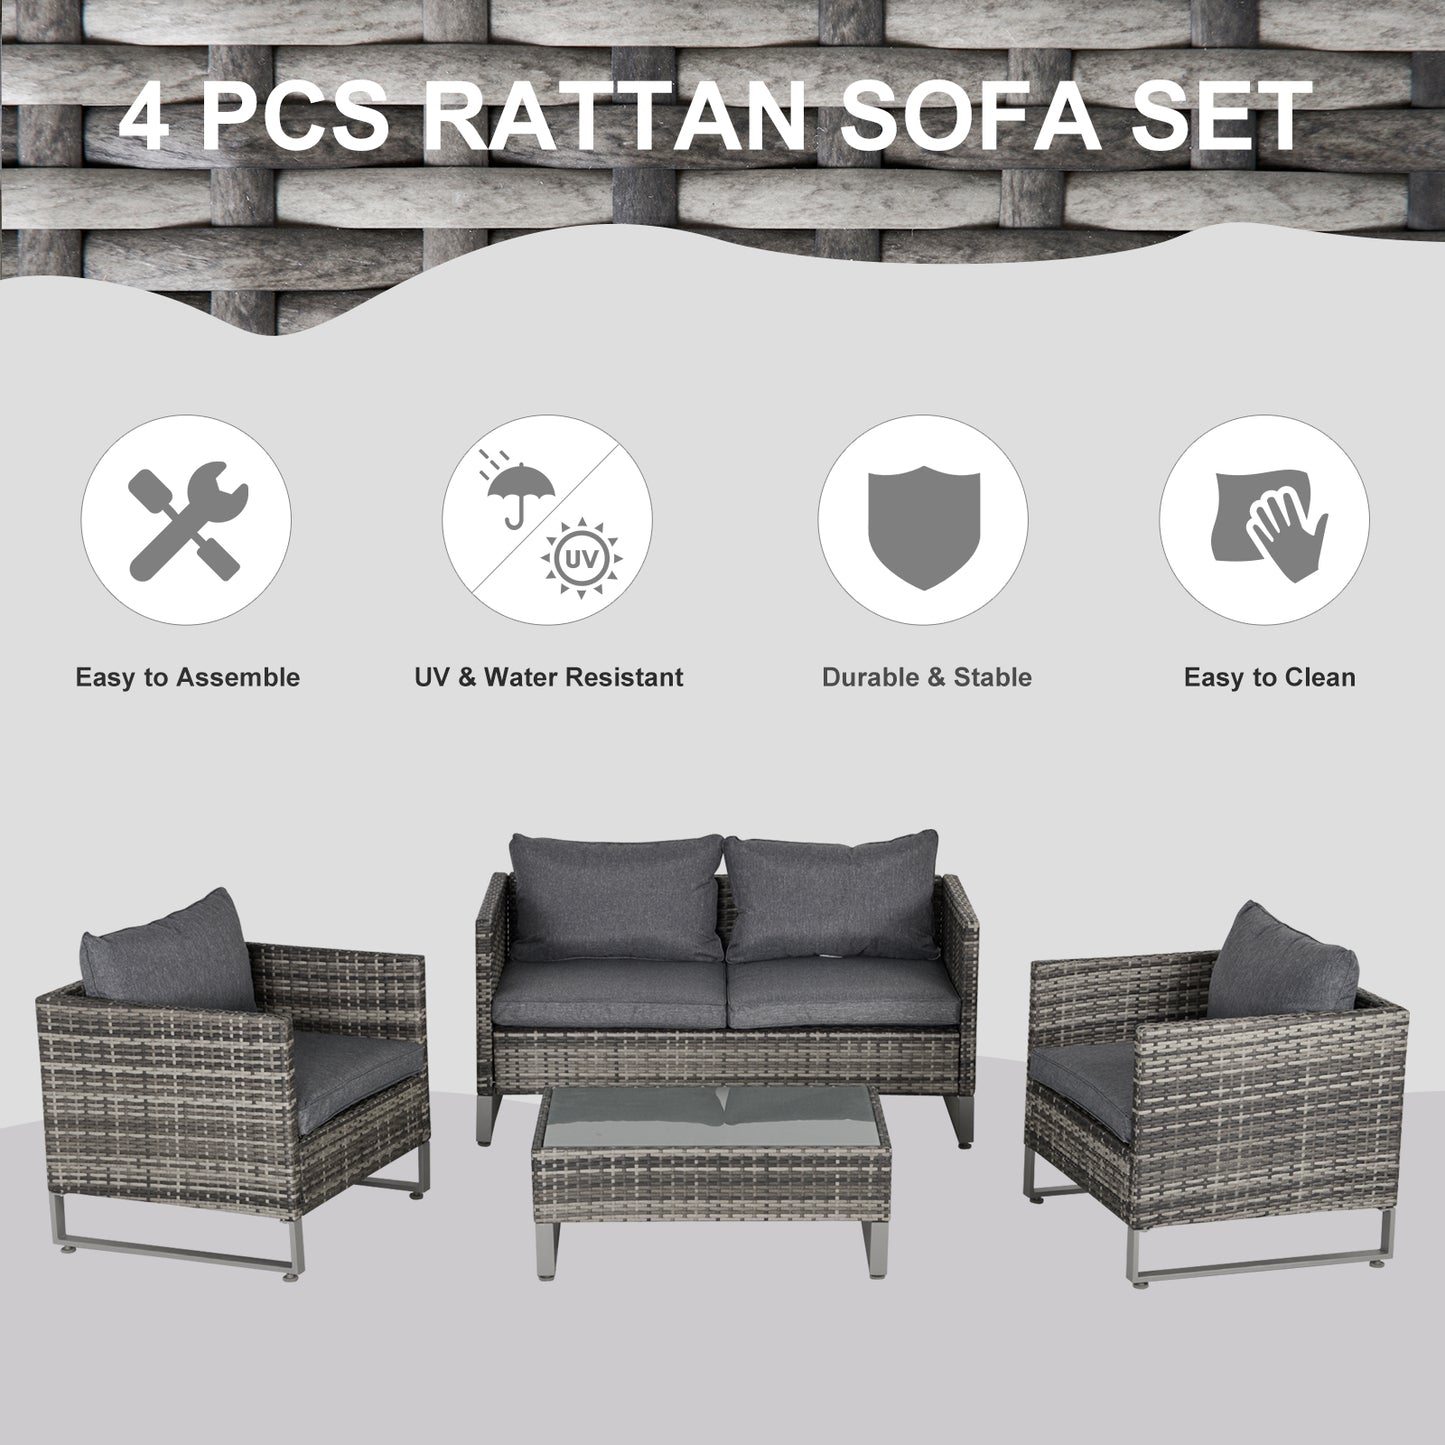 Outsunny 4-Seater PE Rattan Garden Furniture Wicker Dining Set w/ Glass Top Table, Cushions, Deep Grey